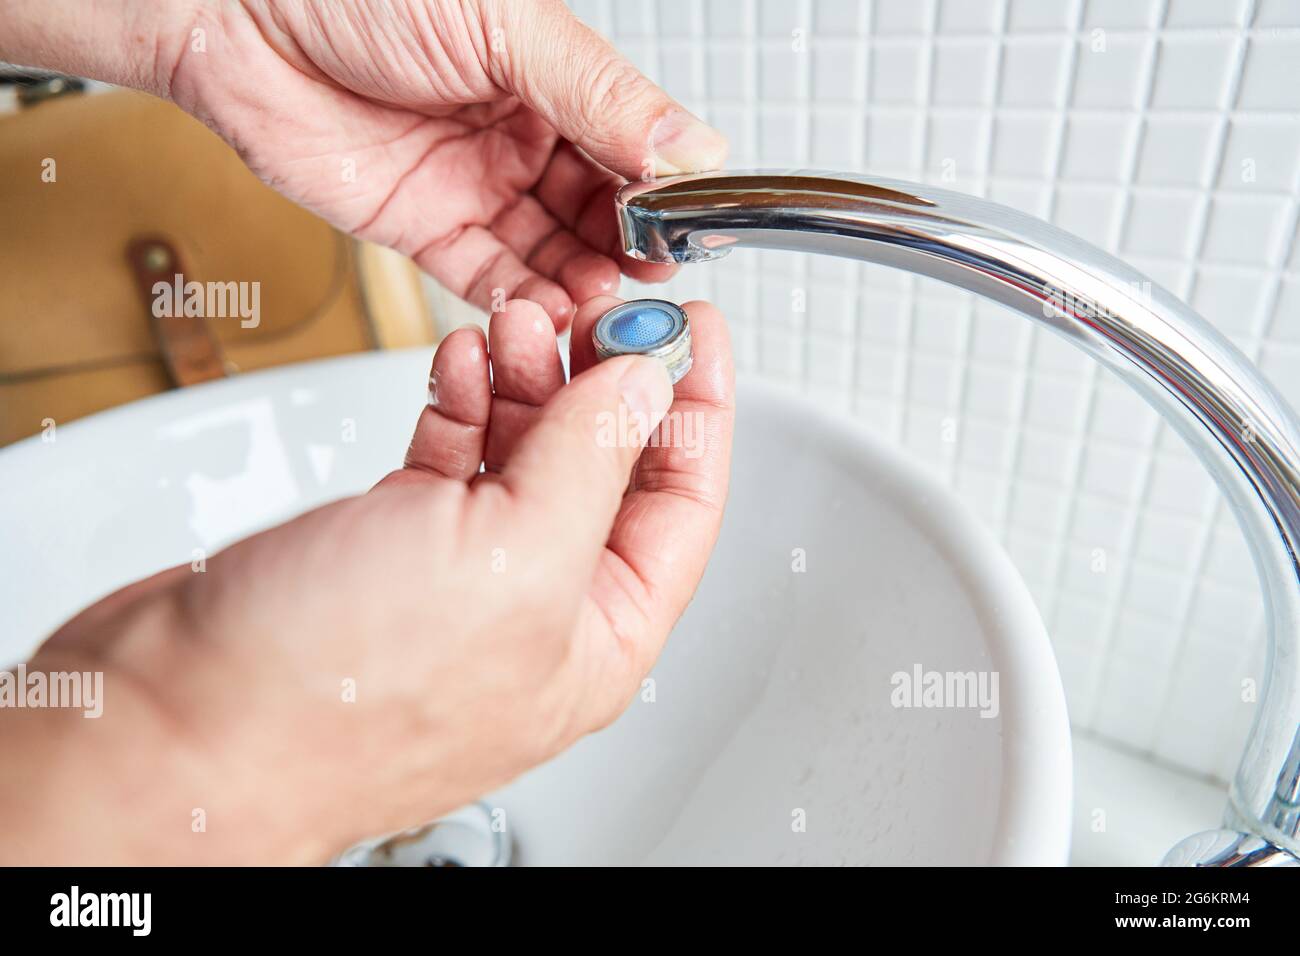 Plumber mounts clean aerator on the faucet in the bathroom after descaling Stock Photo